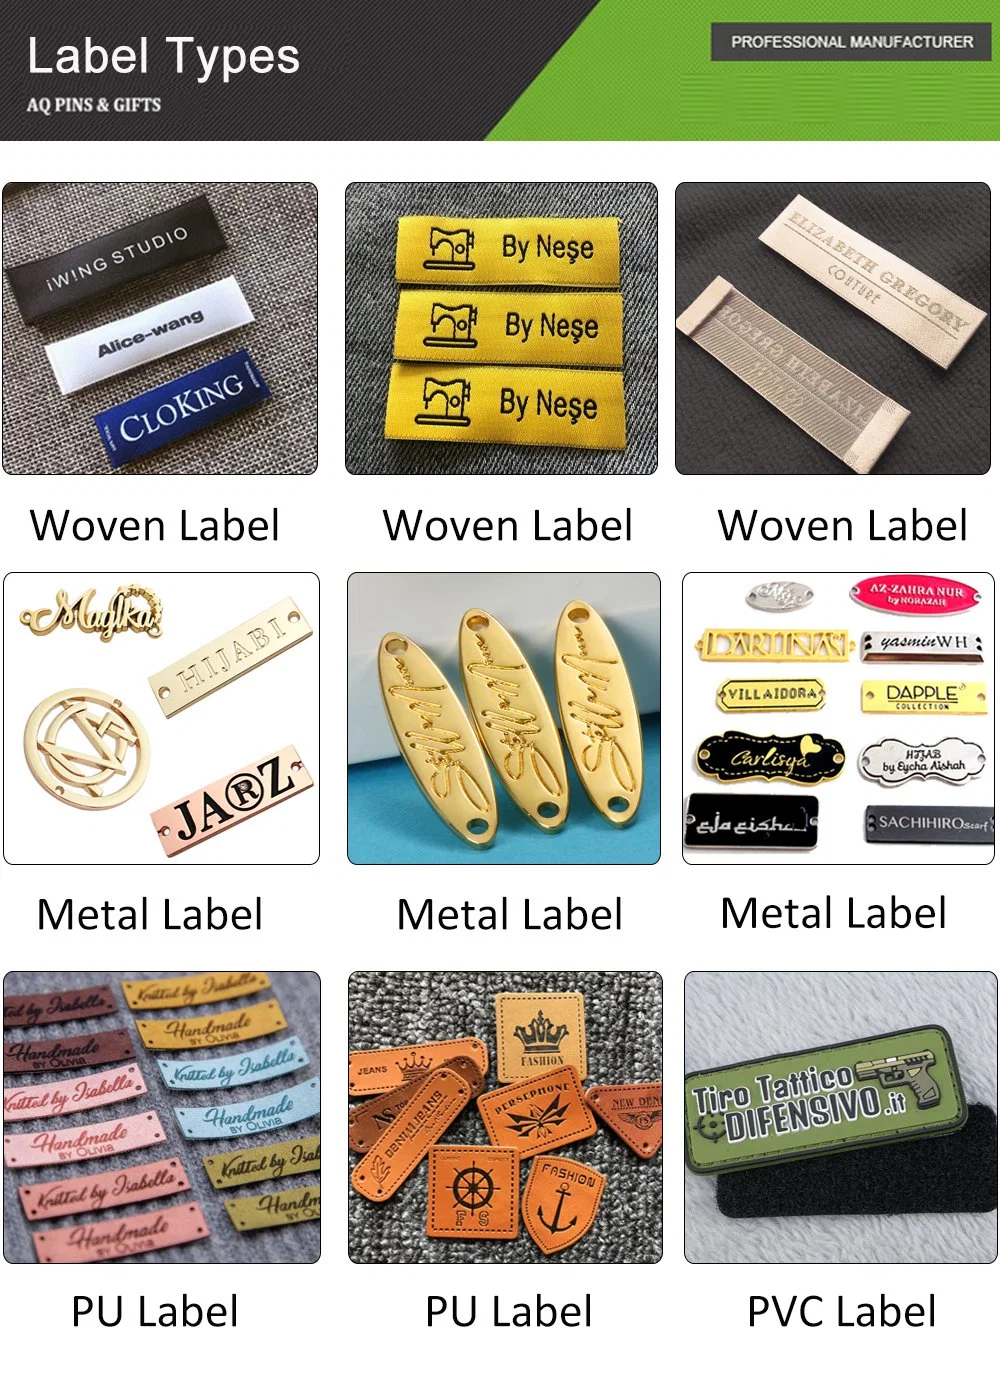 Custom Metalware Clothing Accessories Square-Shape Blank Metal Tag/ Identifier with Name Card